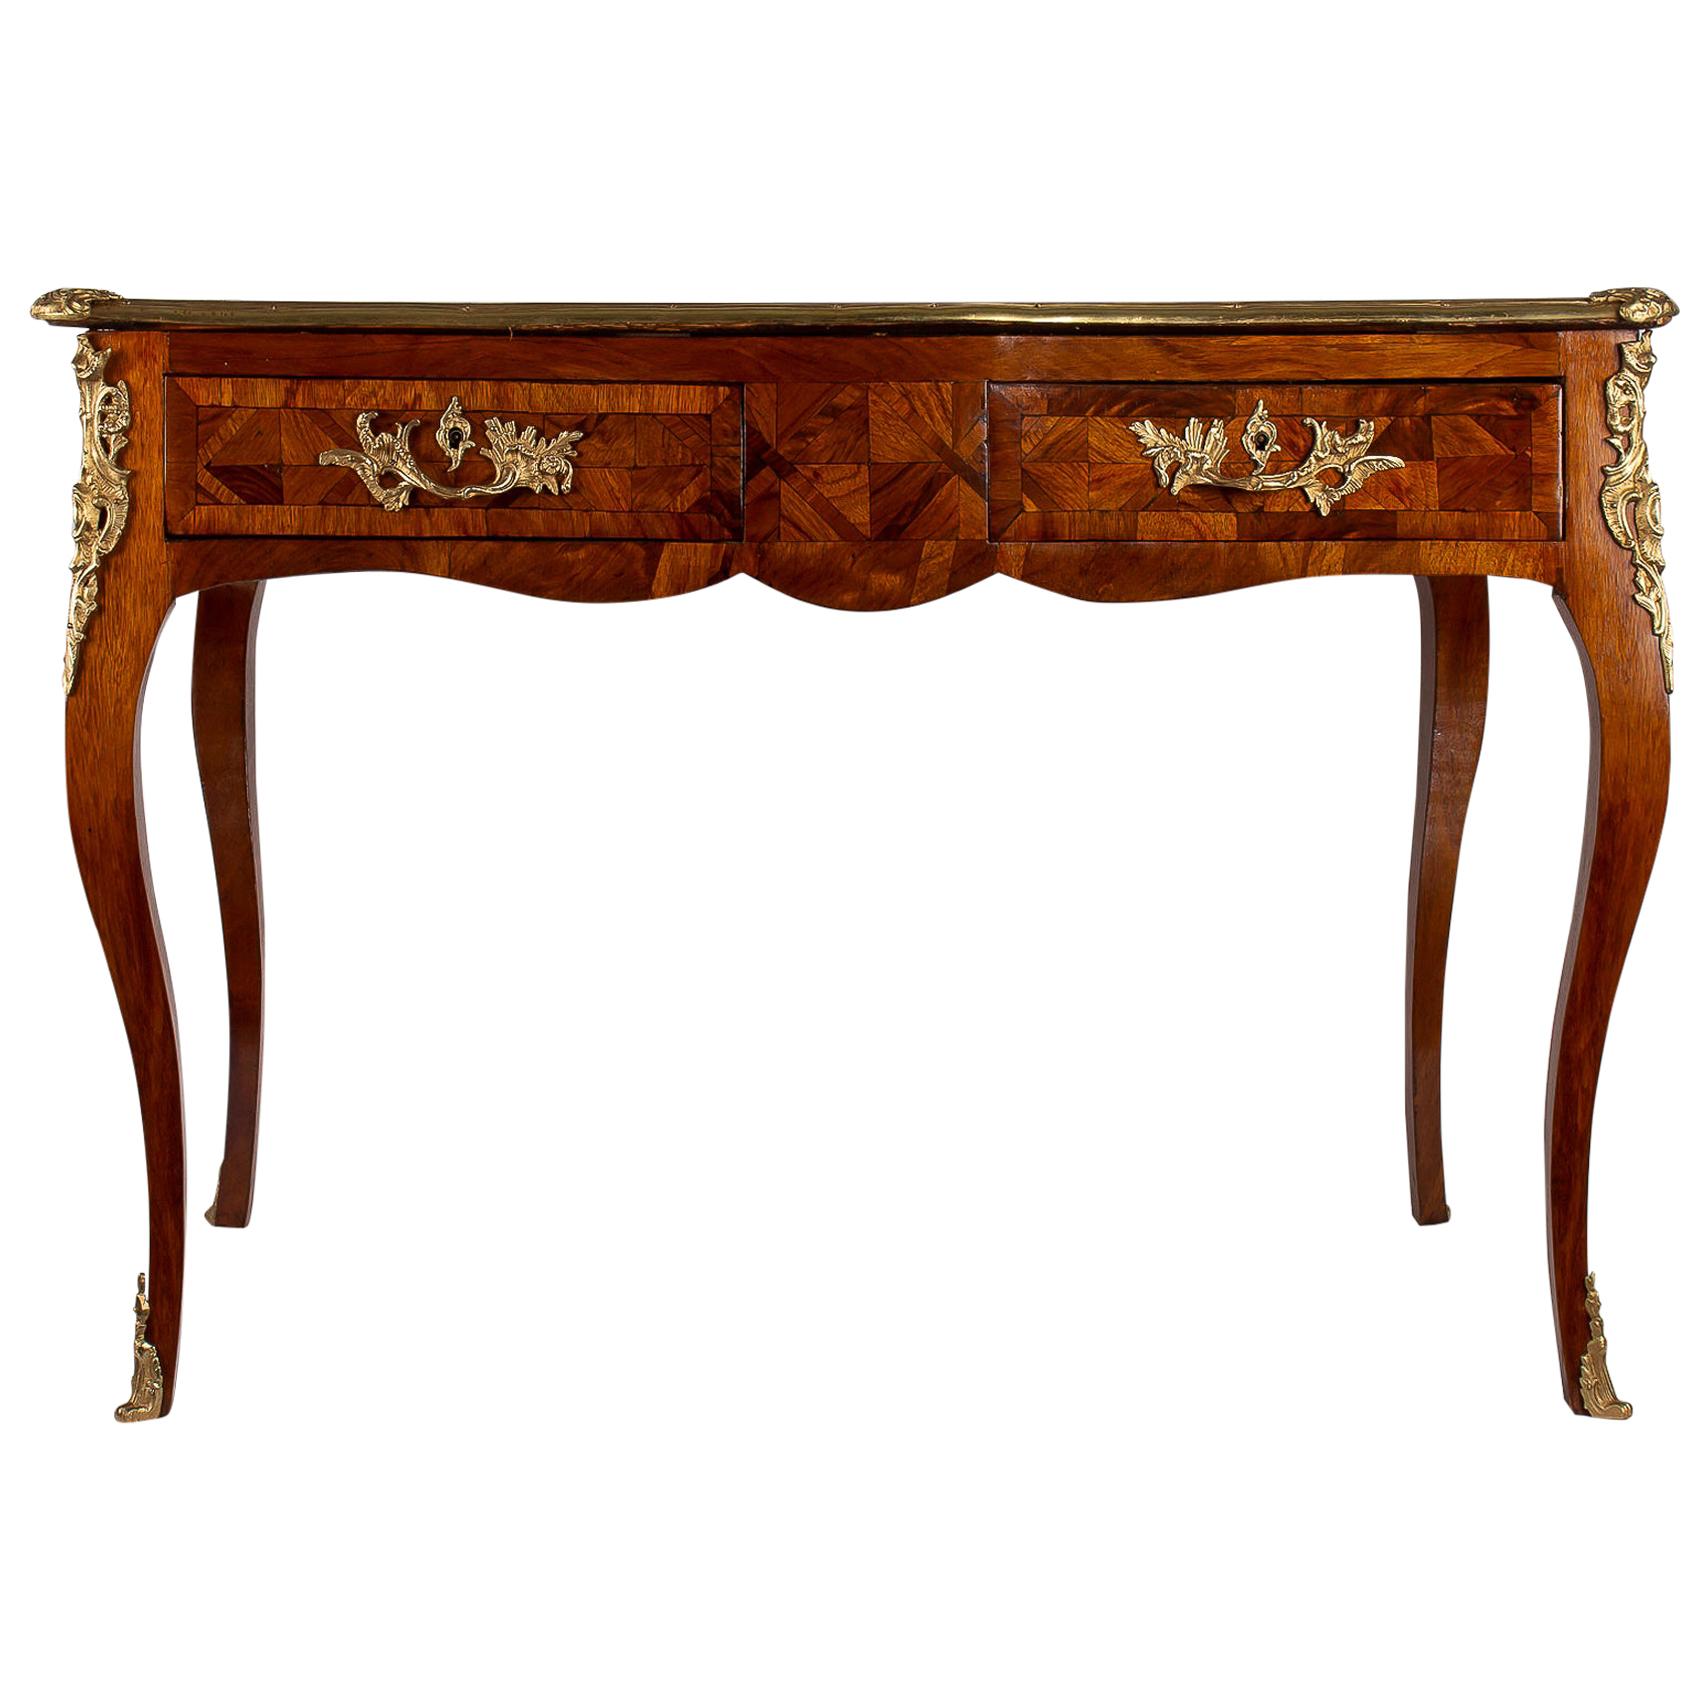 Small French Louis XV Style Marquetry Bureau Plat, circa 1820-1840